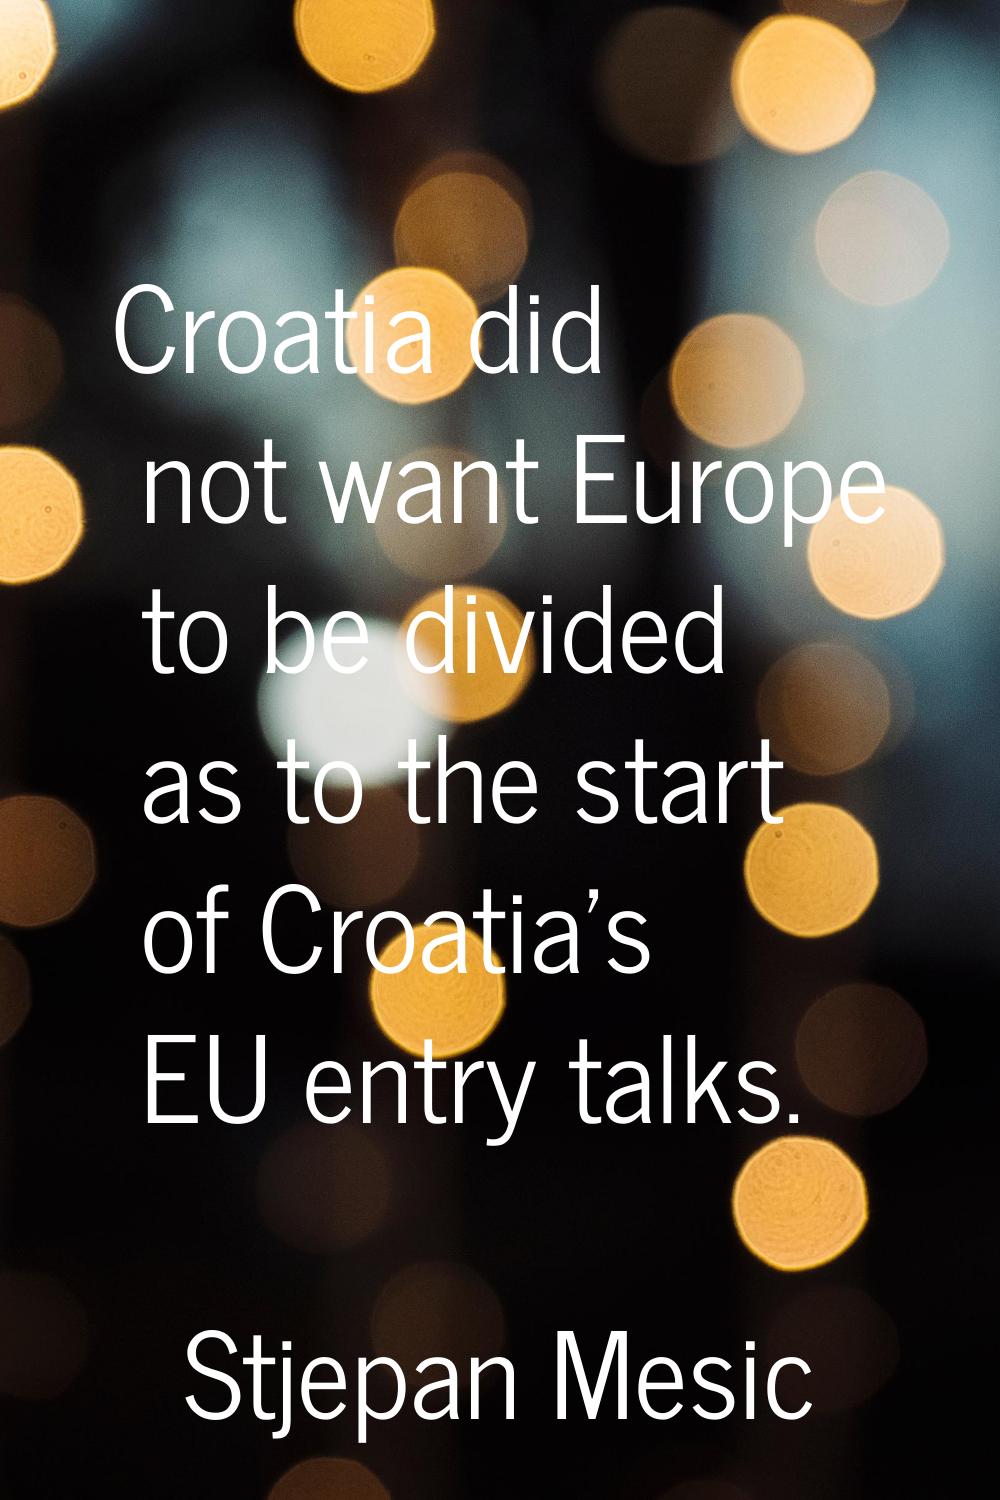 Croatia did not want Europe to be divided as to the start of Croatia's EU entry talks.